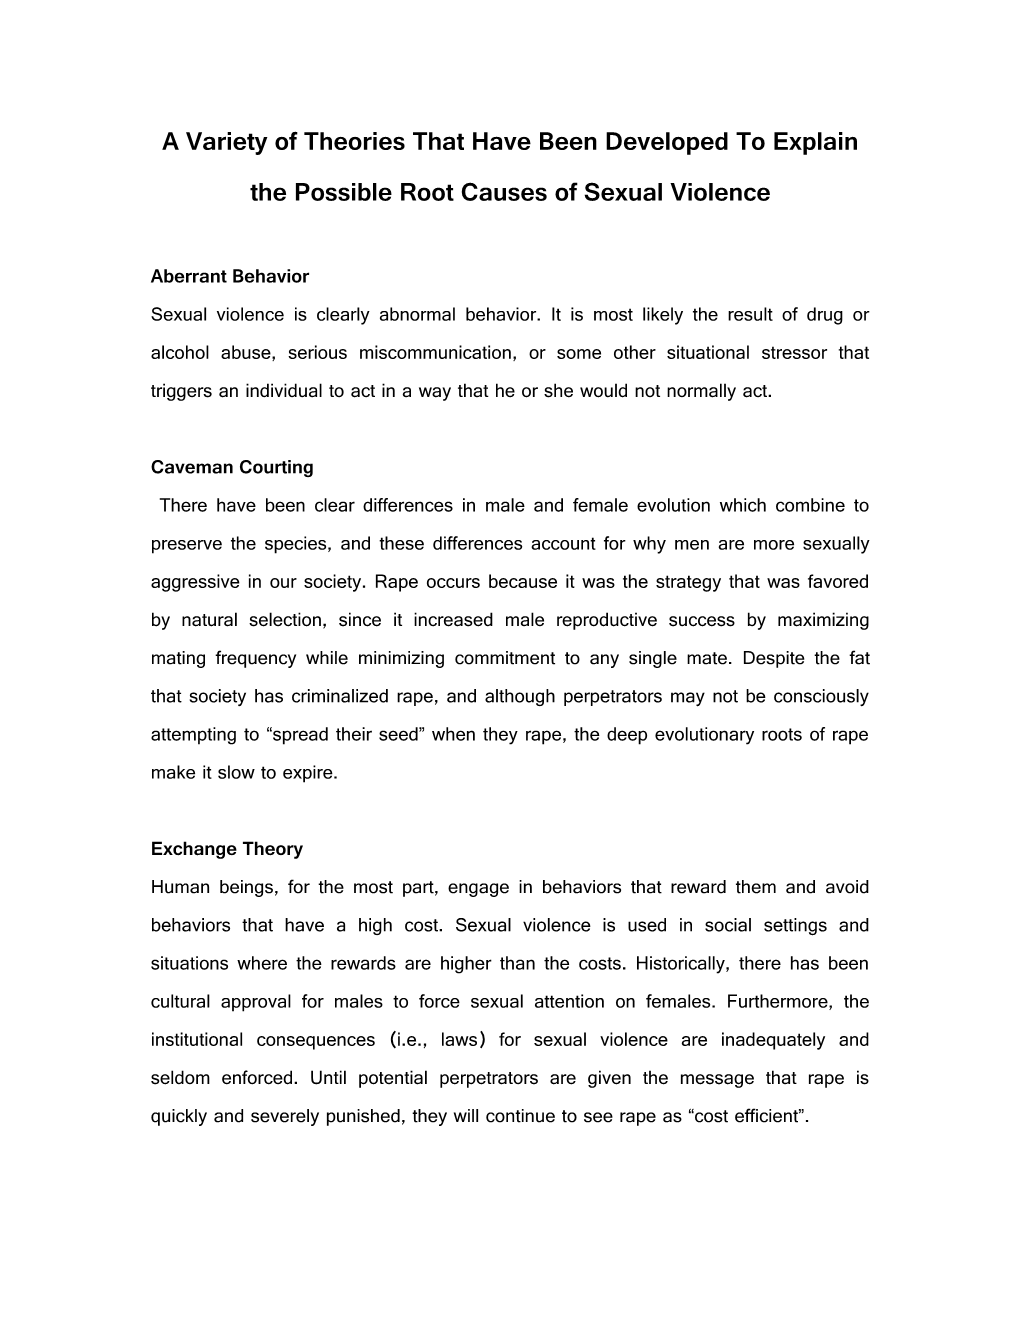 A Variety of Theories That Have Been Developed to Explain the Possible Root Causes of Sexual